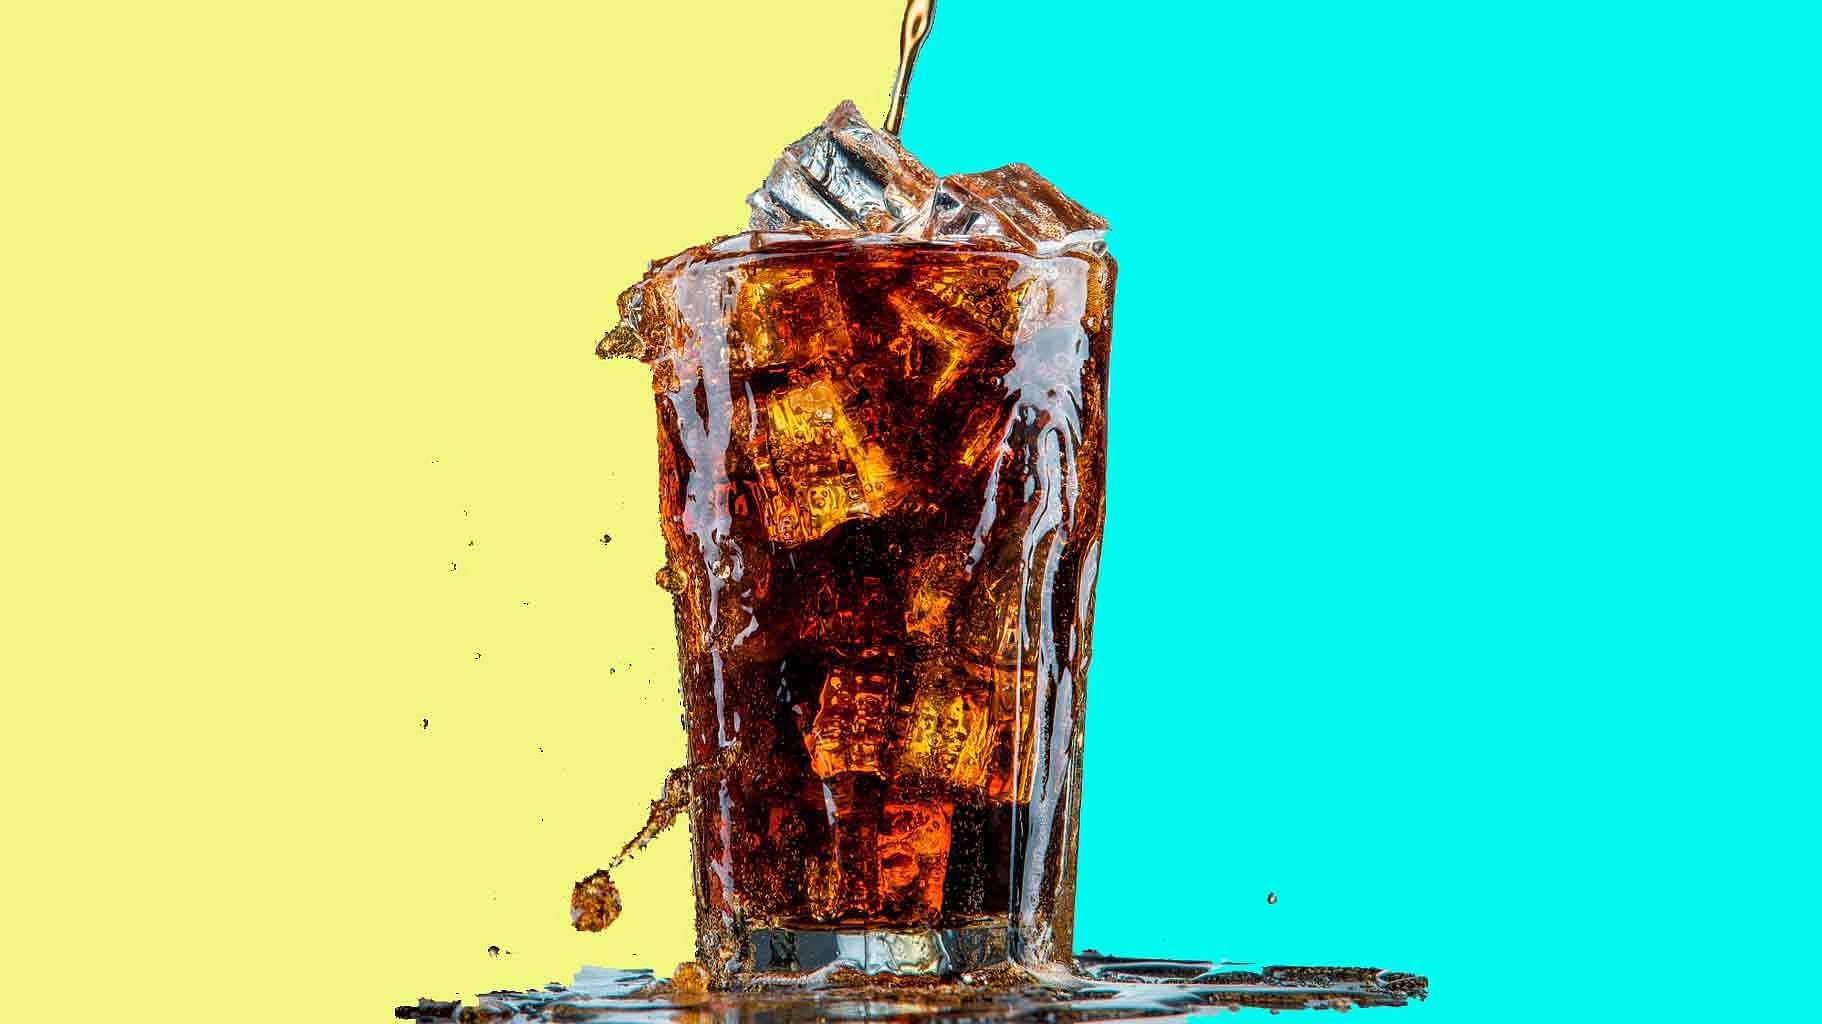 Other chemical compounds, such as additives in some sodas might also play a role, the study said.